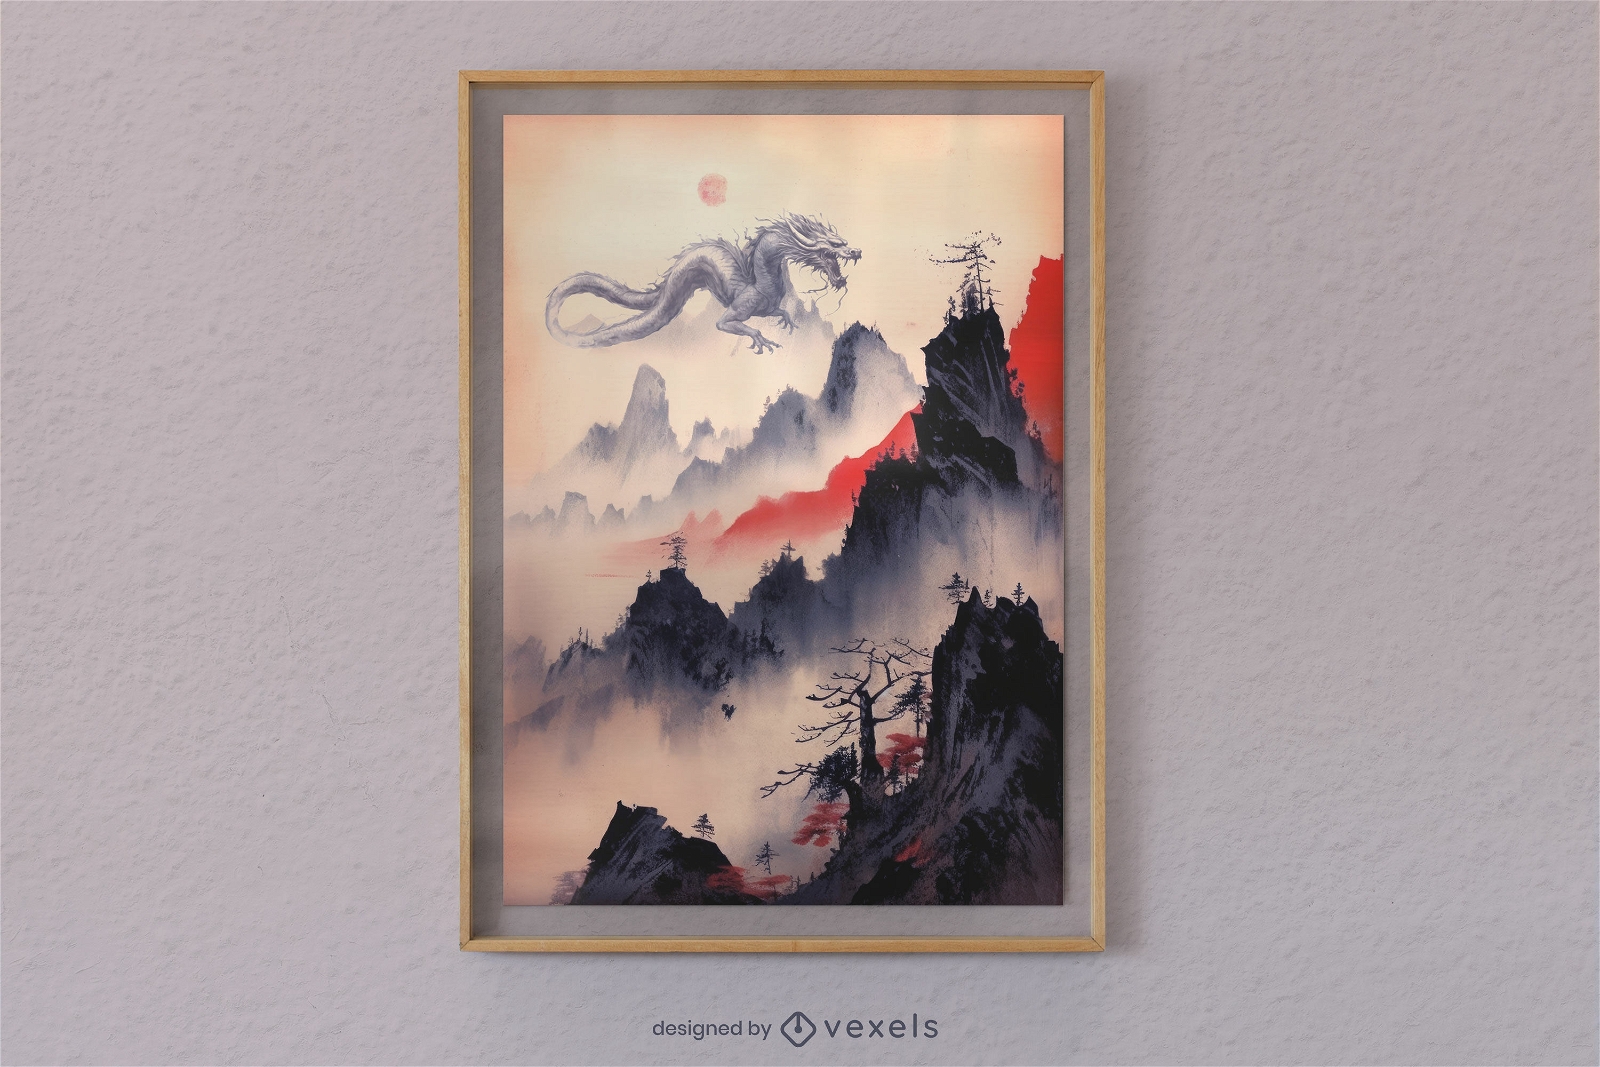 Traditional Japanese dragon poster design